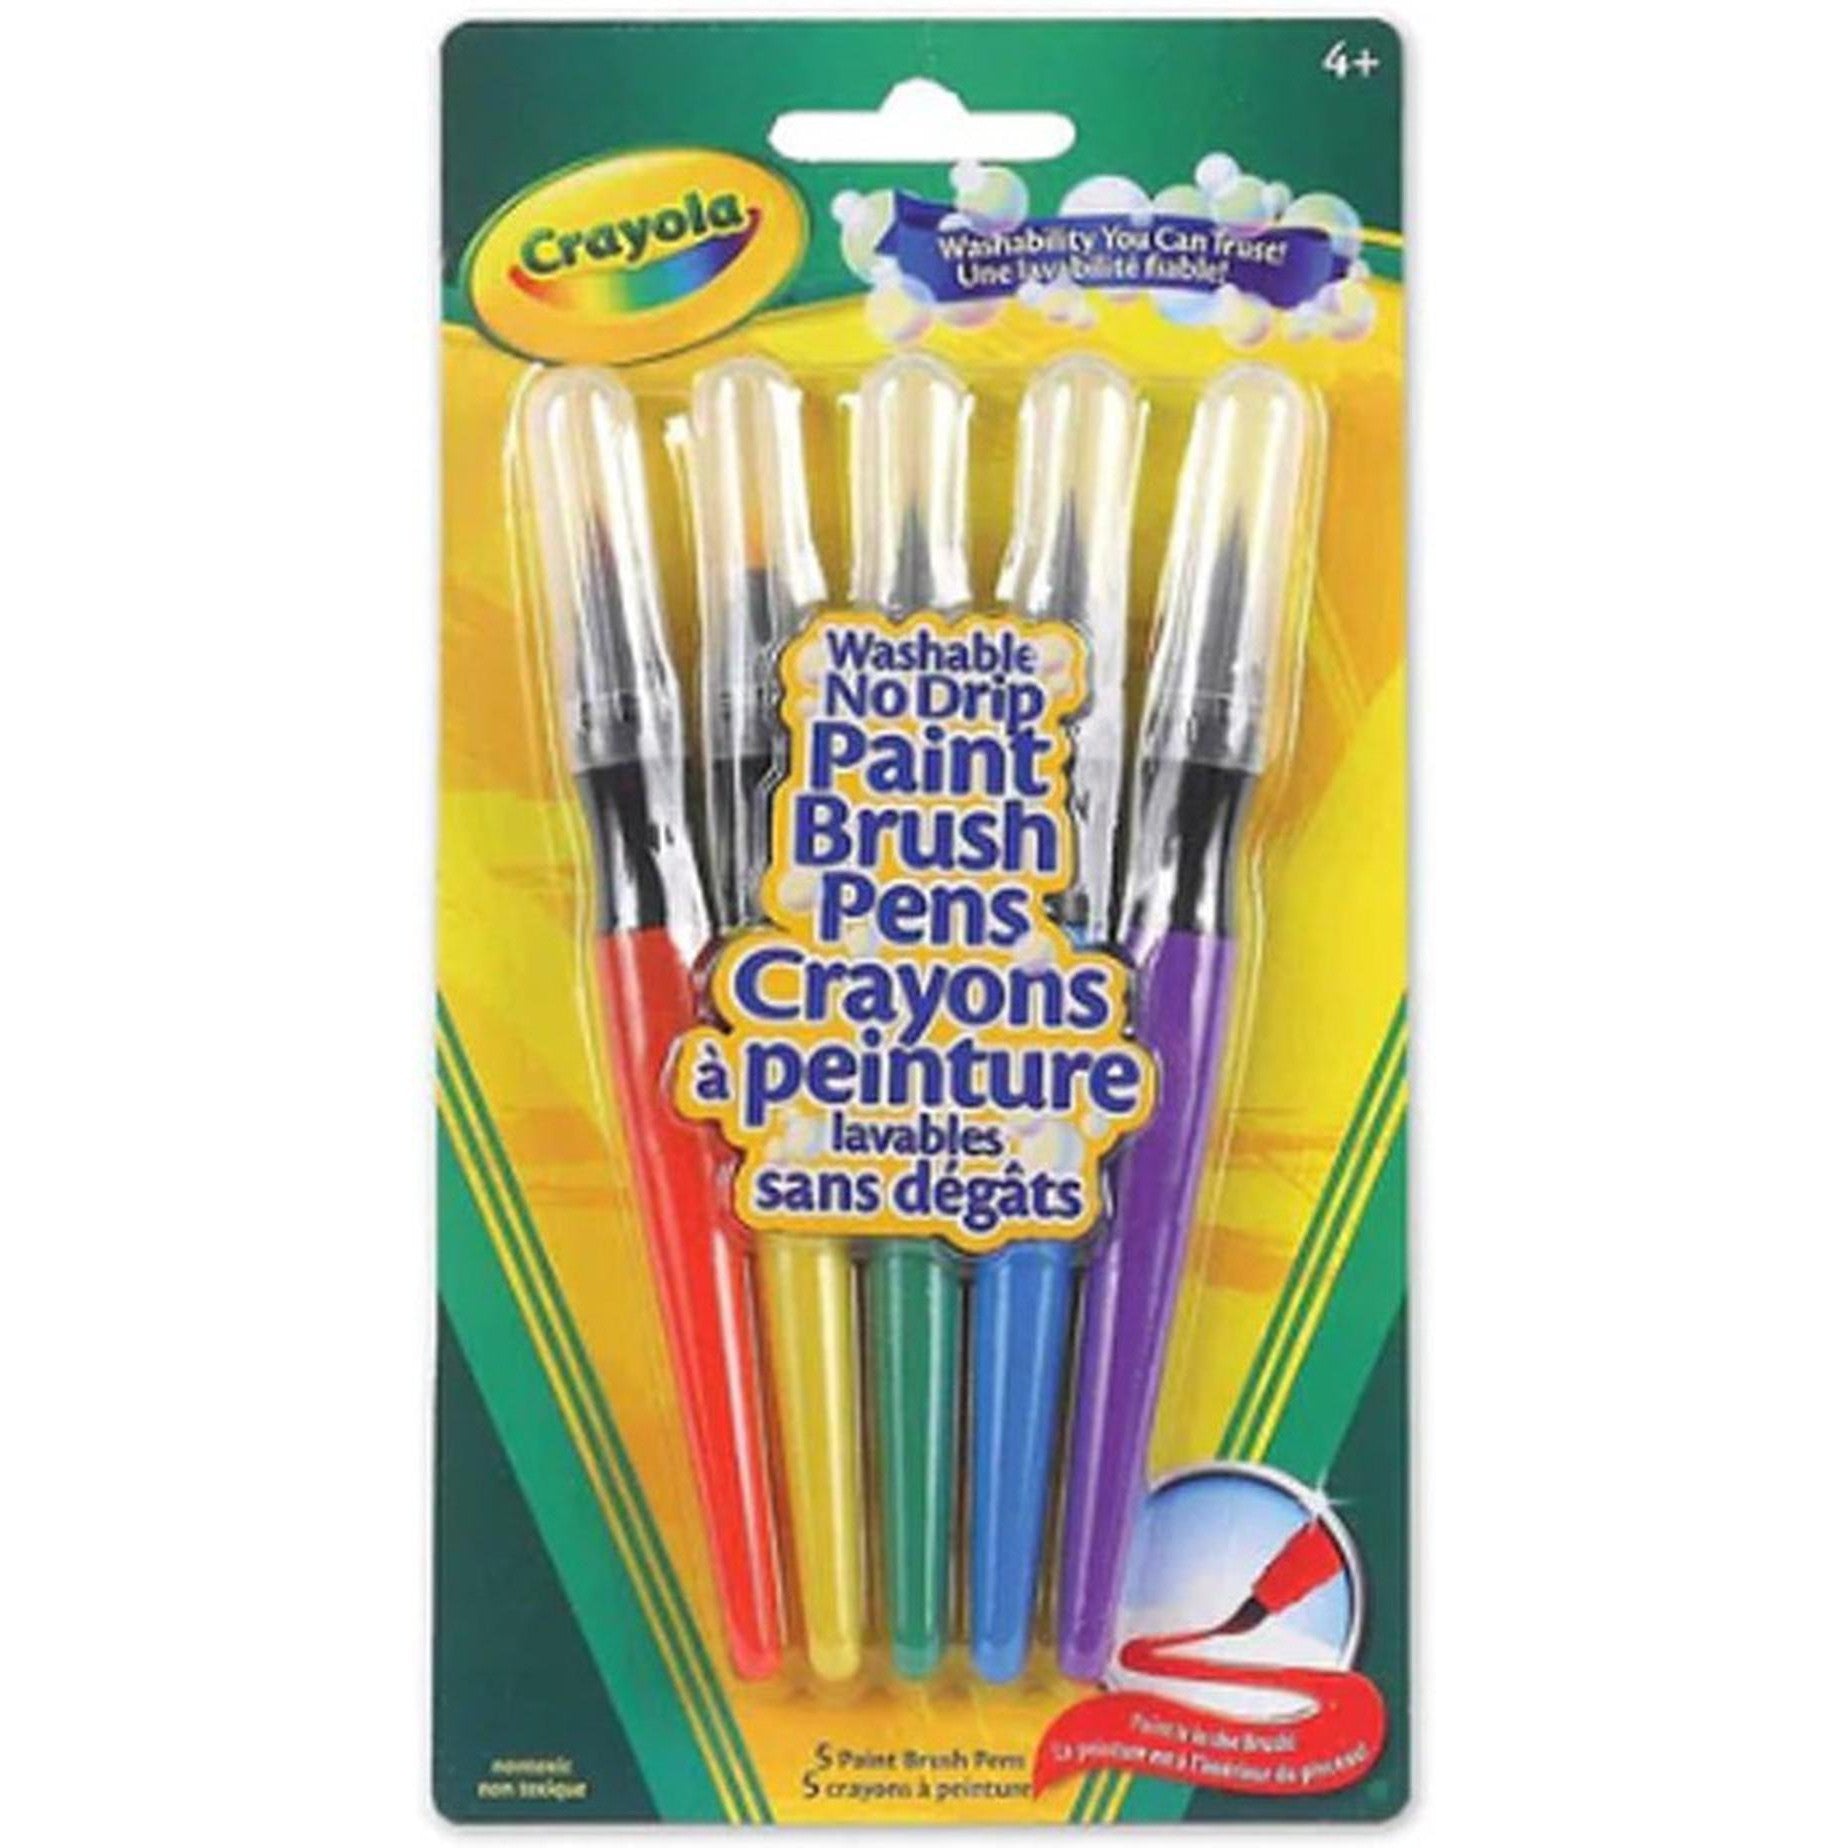 Crayola Washable No Drip Paint Brush Pens-Drawing And Coloring-Crayola-Star Light Kuwait